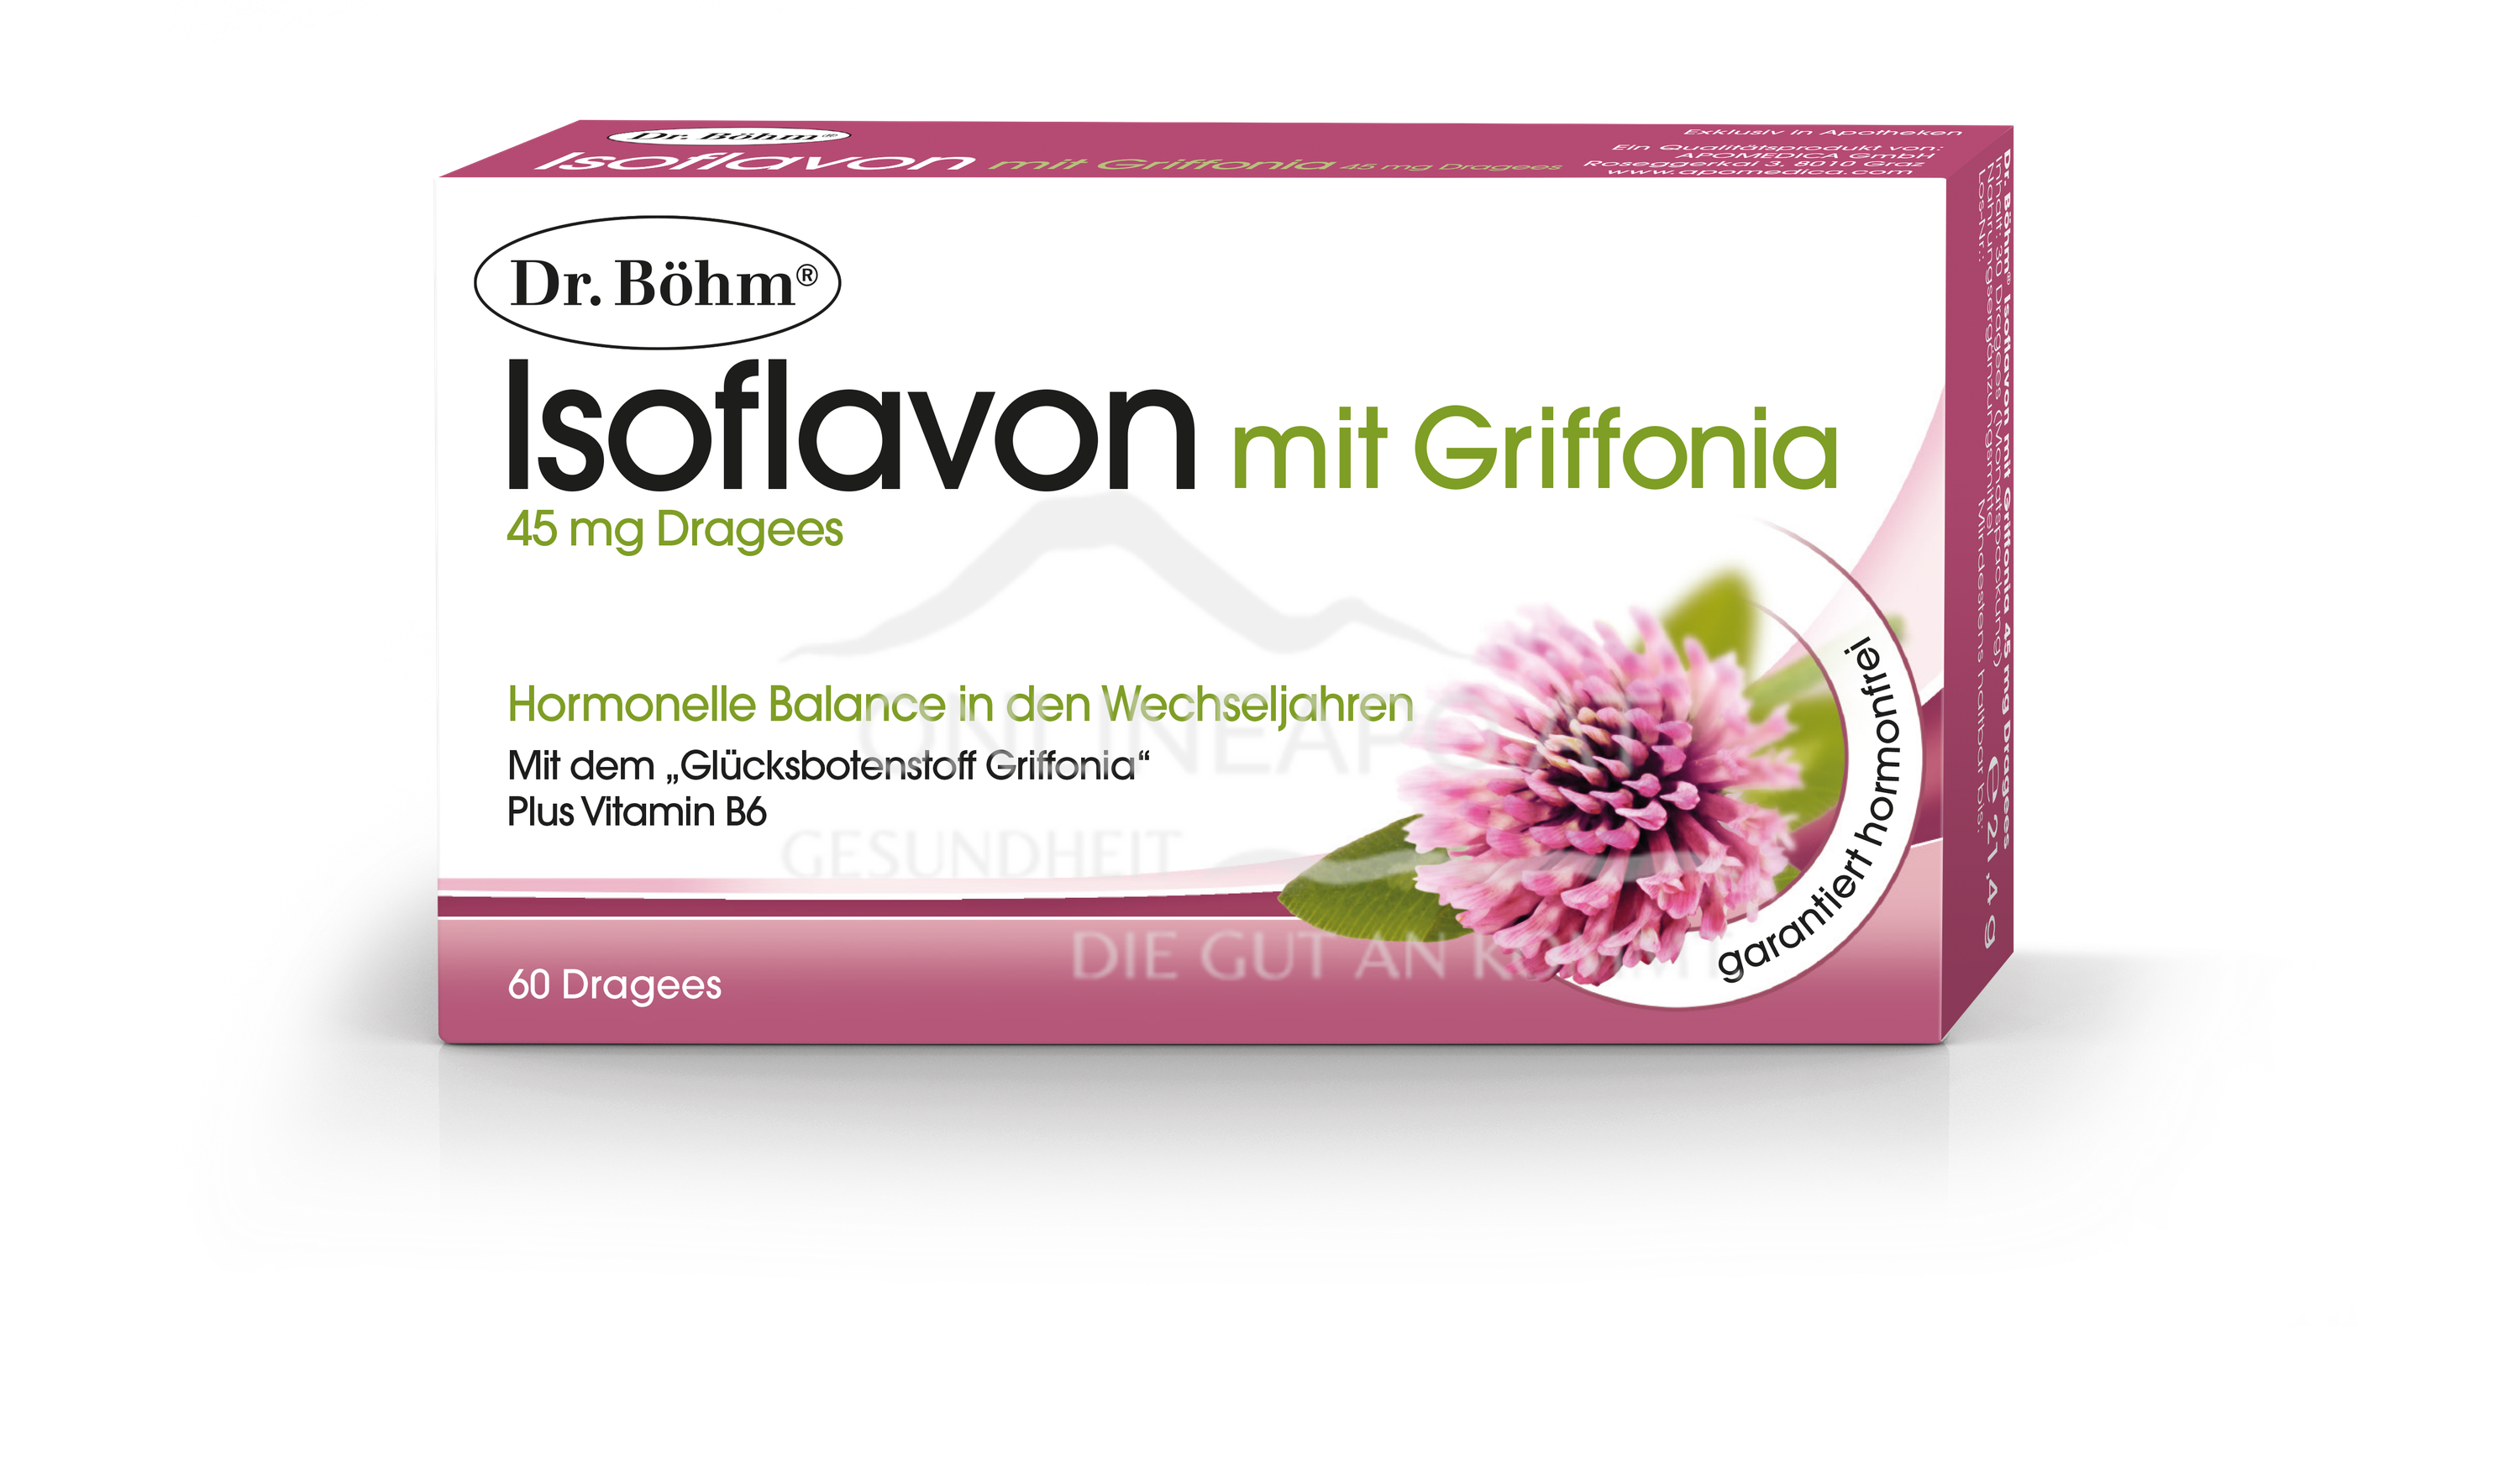 Dr. Böhm® Isoflavon mit Griffonia 45mg Dragees